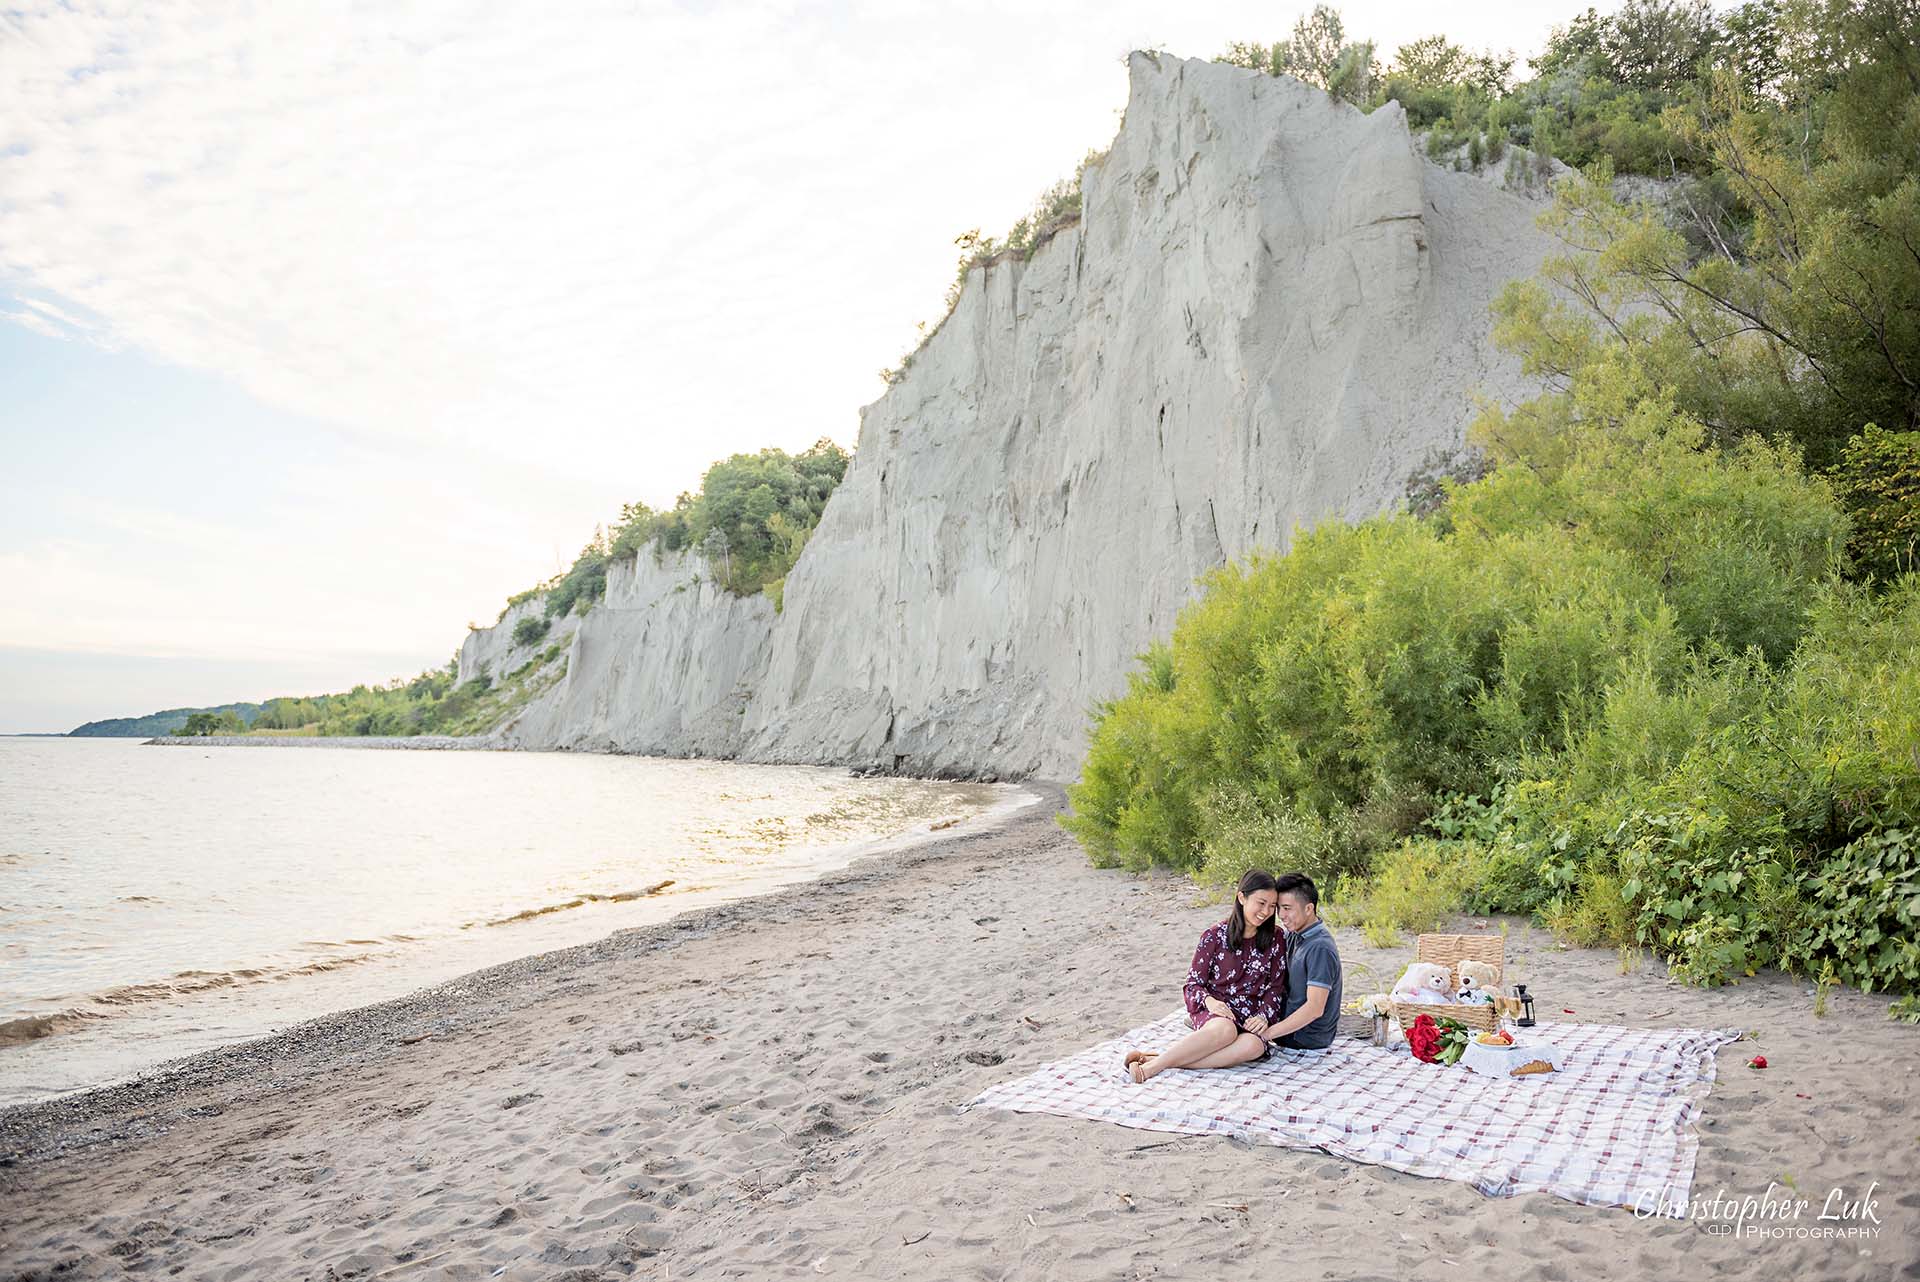 Christopher Luk Toronto Photographer Scarborough Bluffs Beach Park Sunset Surprise Wedding Marriage Engagement Proposal Candid Natural Photojournalistic Bride Groom Picnic Blanket Basket Teddy Bears Sitting Together Laughing Smiling Wide Landscape